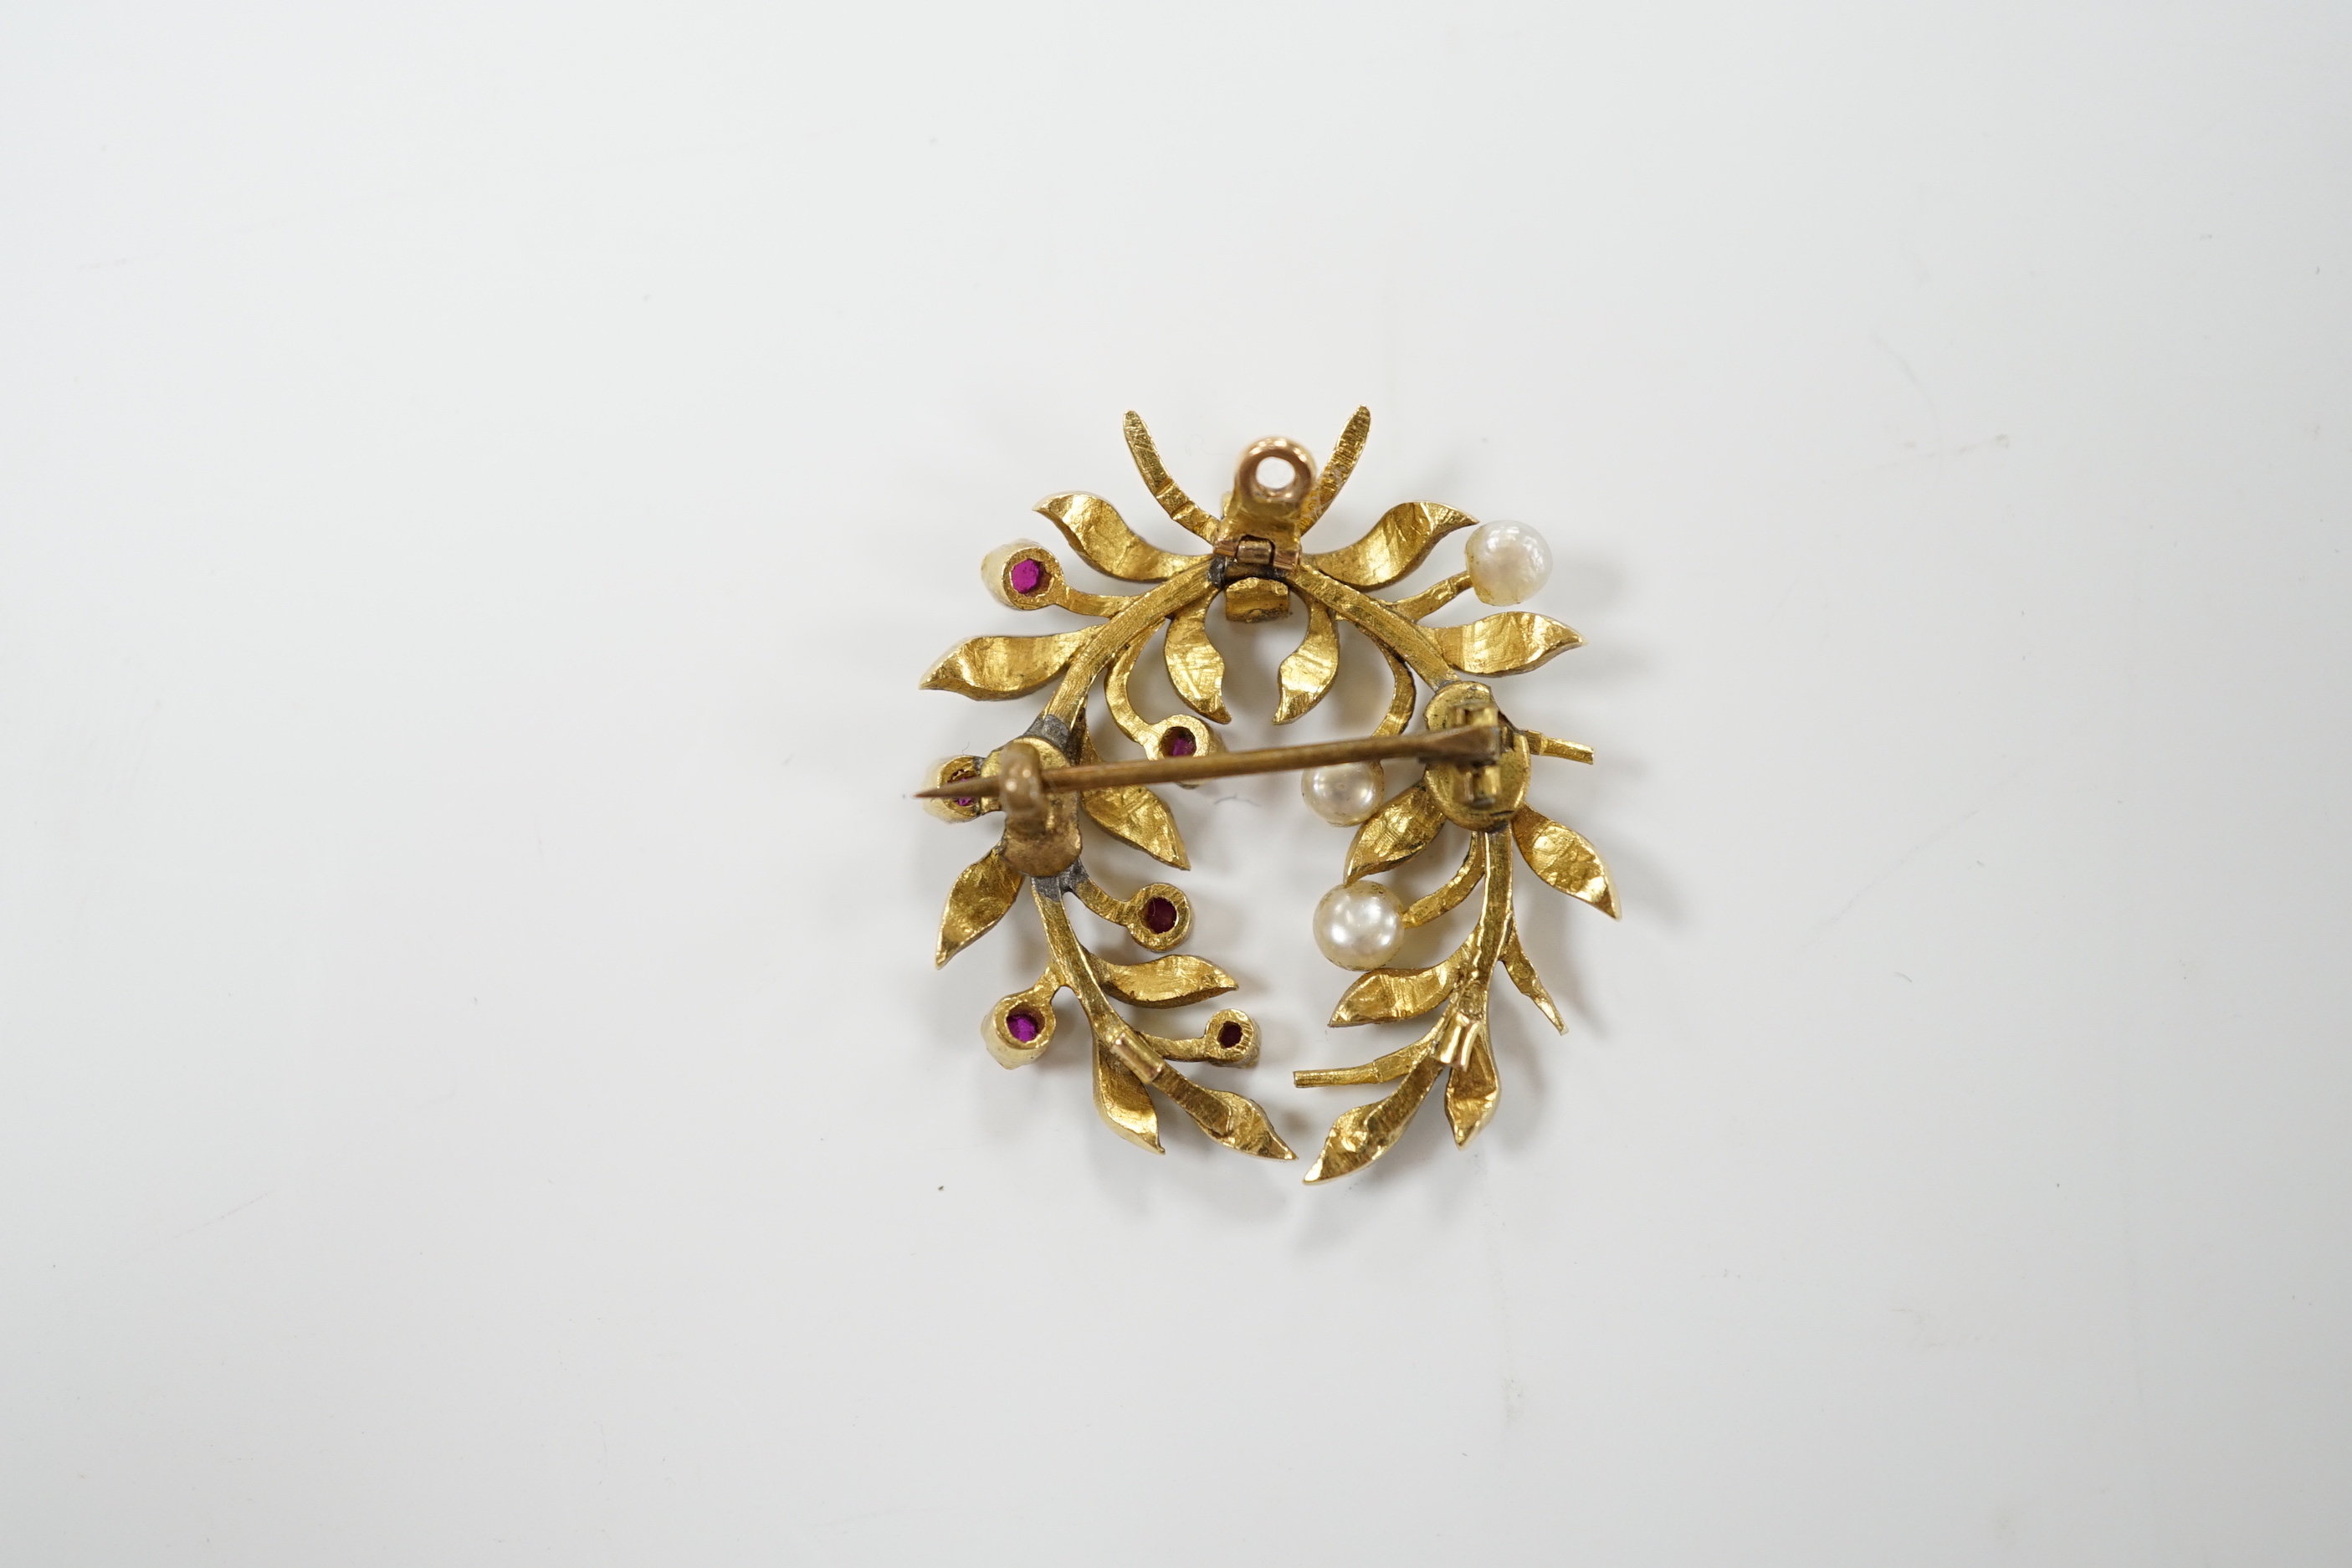 A yellow metal, green enamel, ruby and seed pearl cluster set wreath pendant brooch, 29mm, gross weight 6.9 grams.